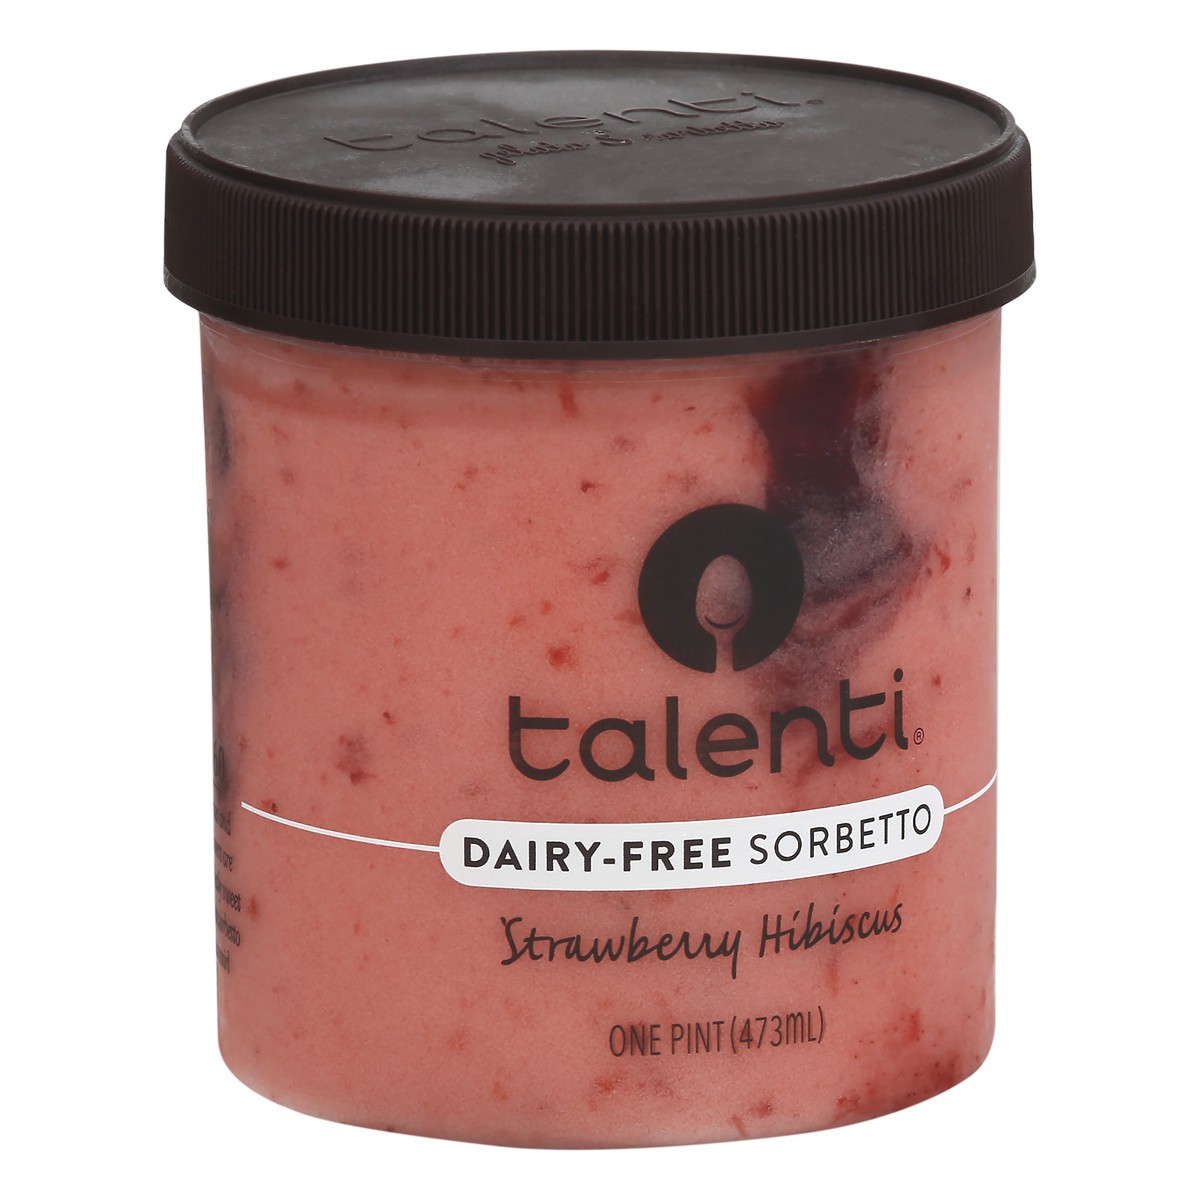 slide 11 of 12, Talenti Dairy-Free Sorbetto Strawberry Hibiscus, 1 pint, 1 pint